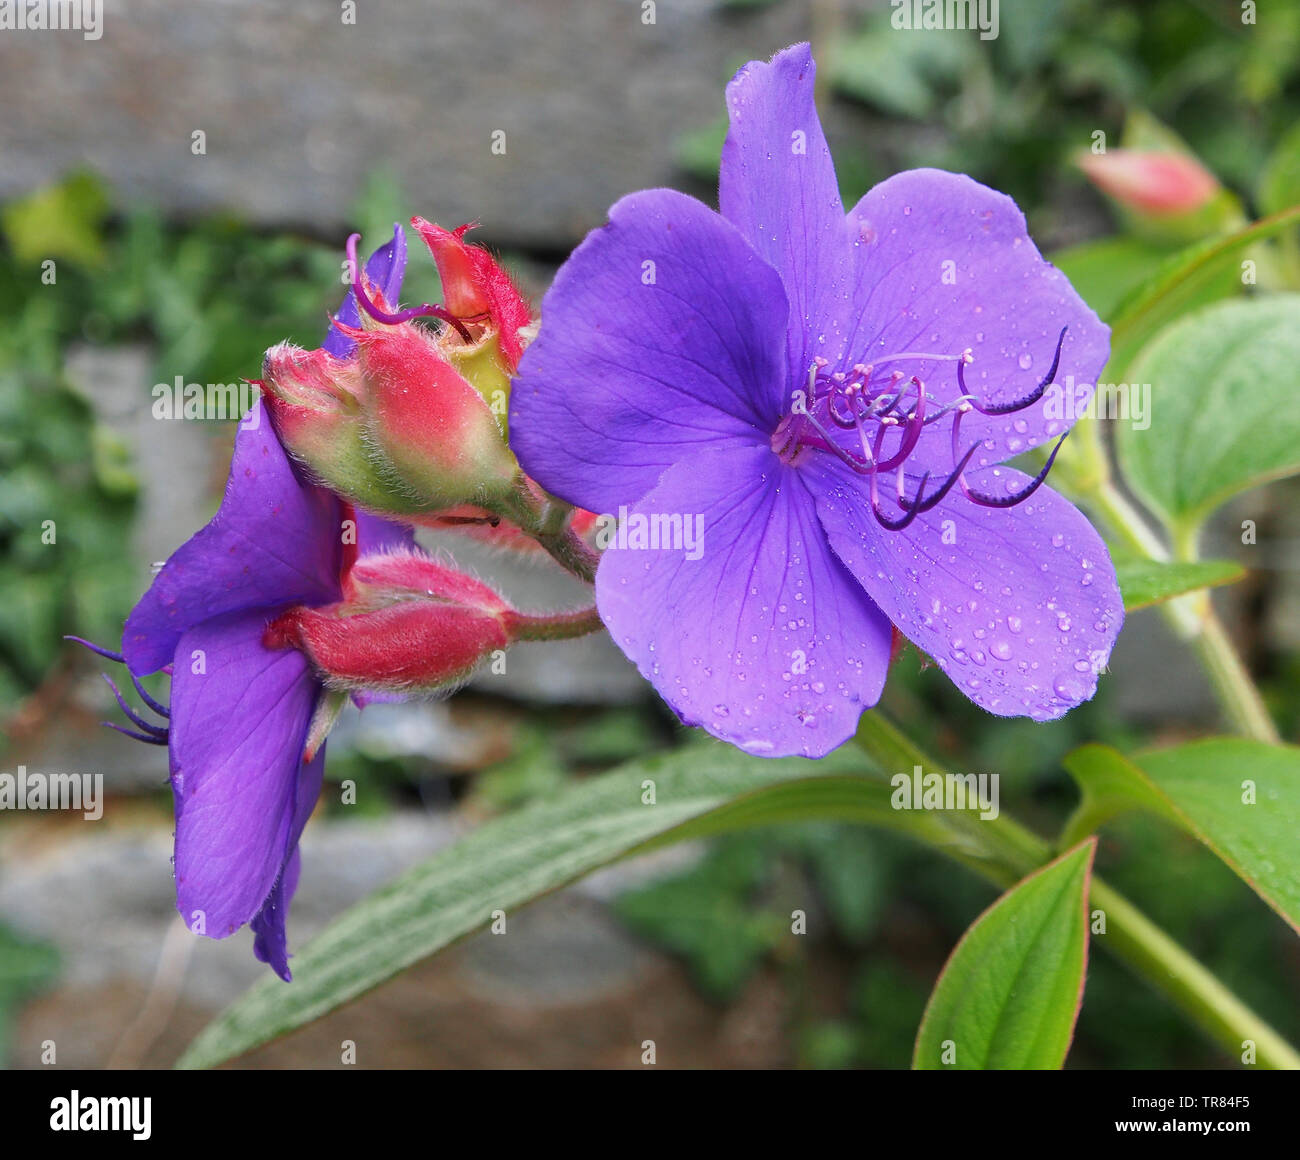 Purple flower and red buds of the Tibouchina Urvilleana (Melastomataceae). Also known as the 'glory bush' and other common names. Stock Photo